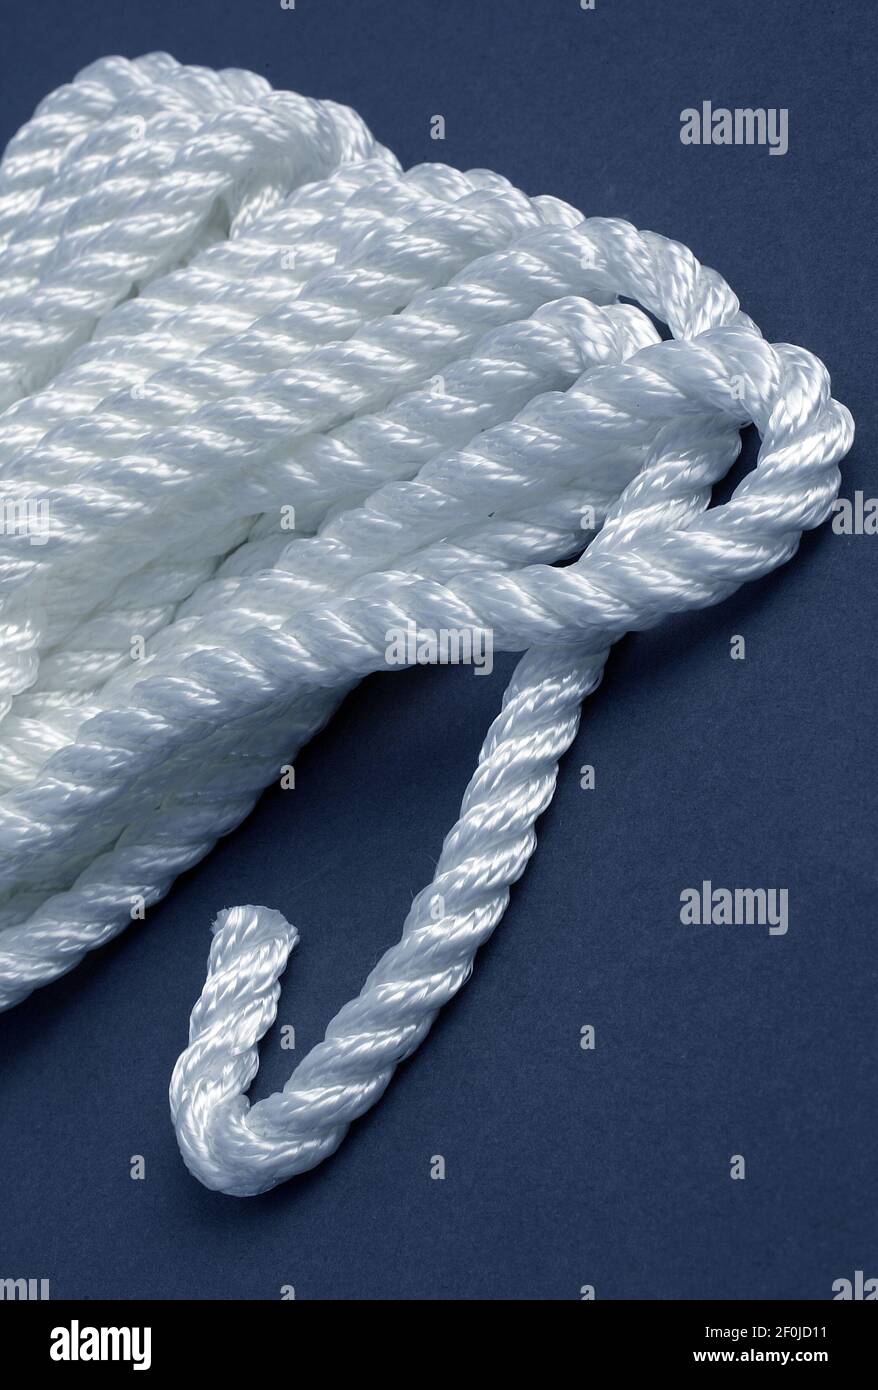 quot;Learn the Ropes of Summer Fun" about different types of useful  rope to have around the house for play and work such as nylon yacht braid.  Good for: boating. The shock-absorbent and